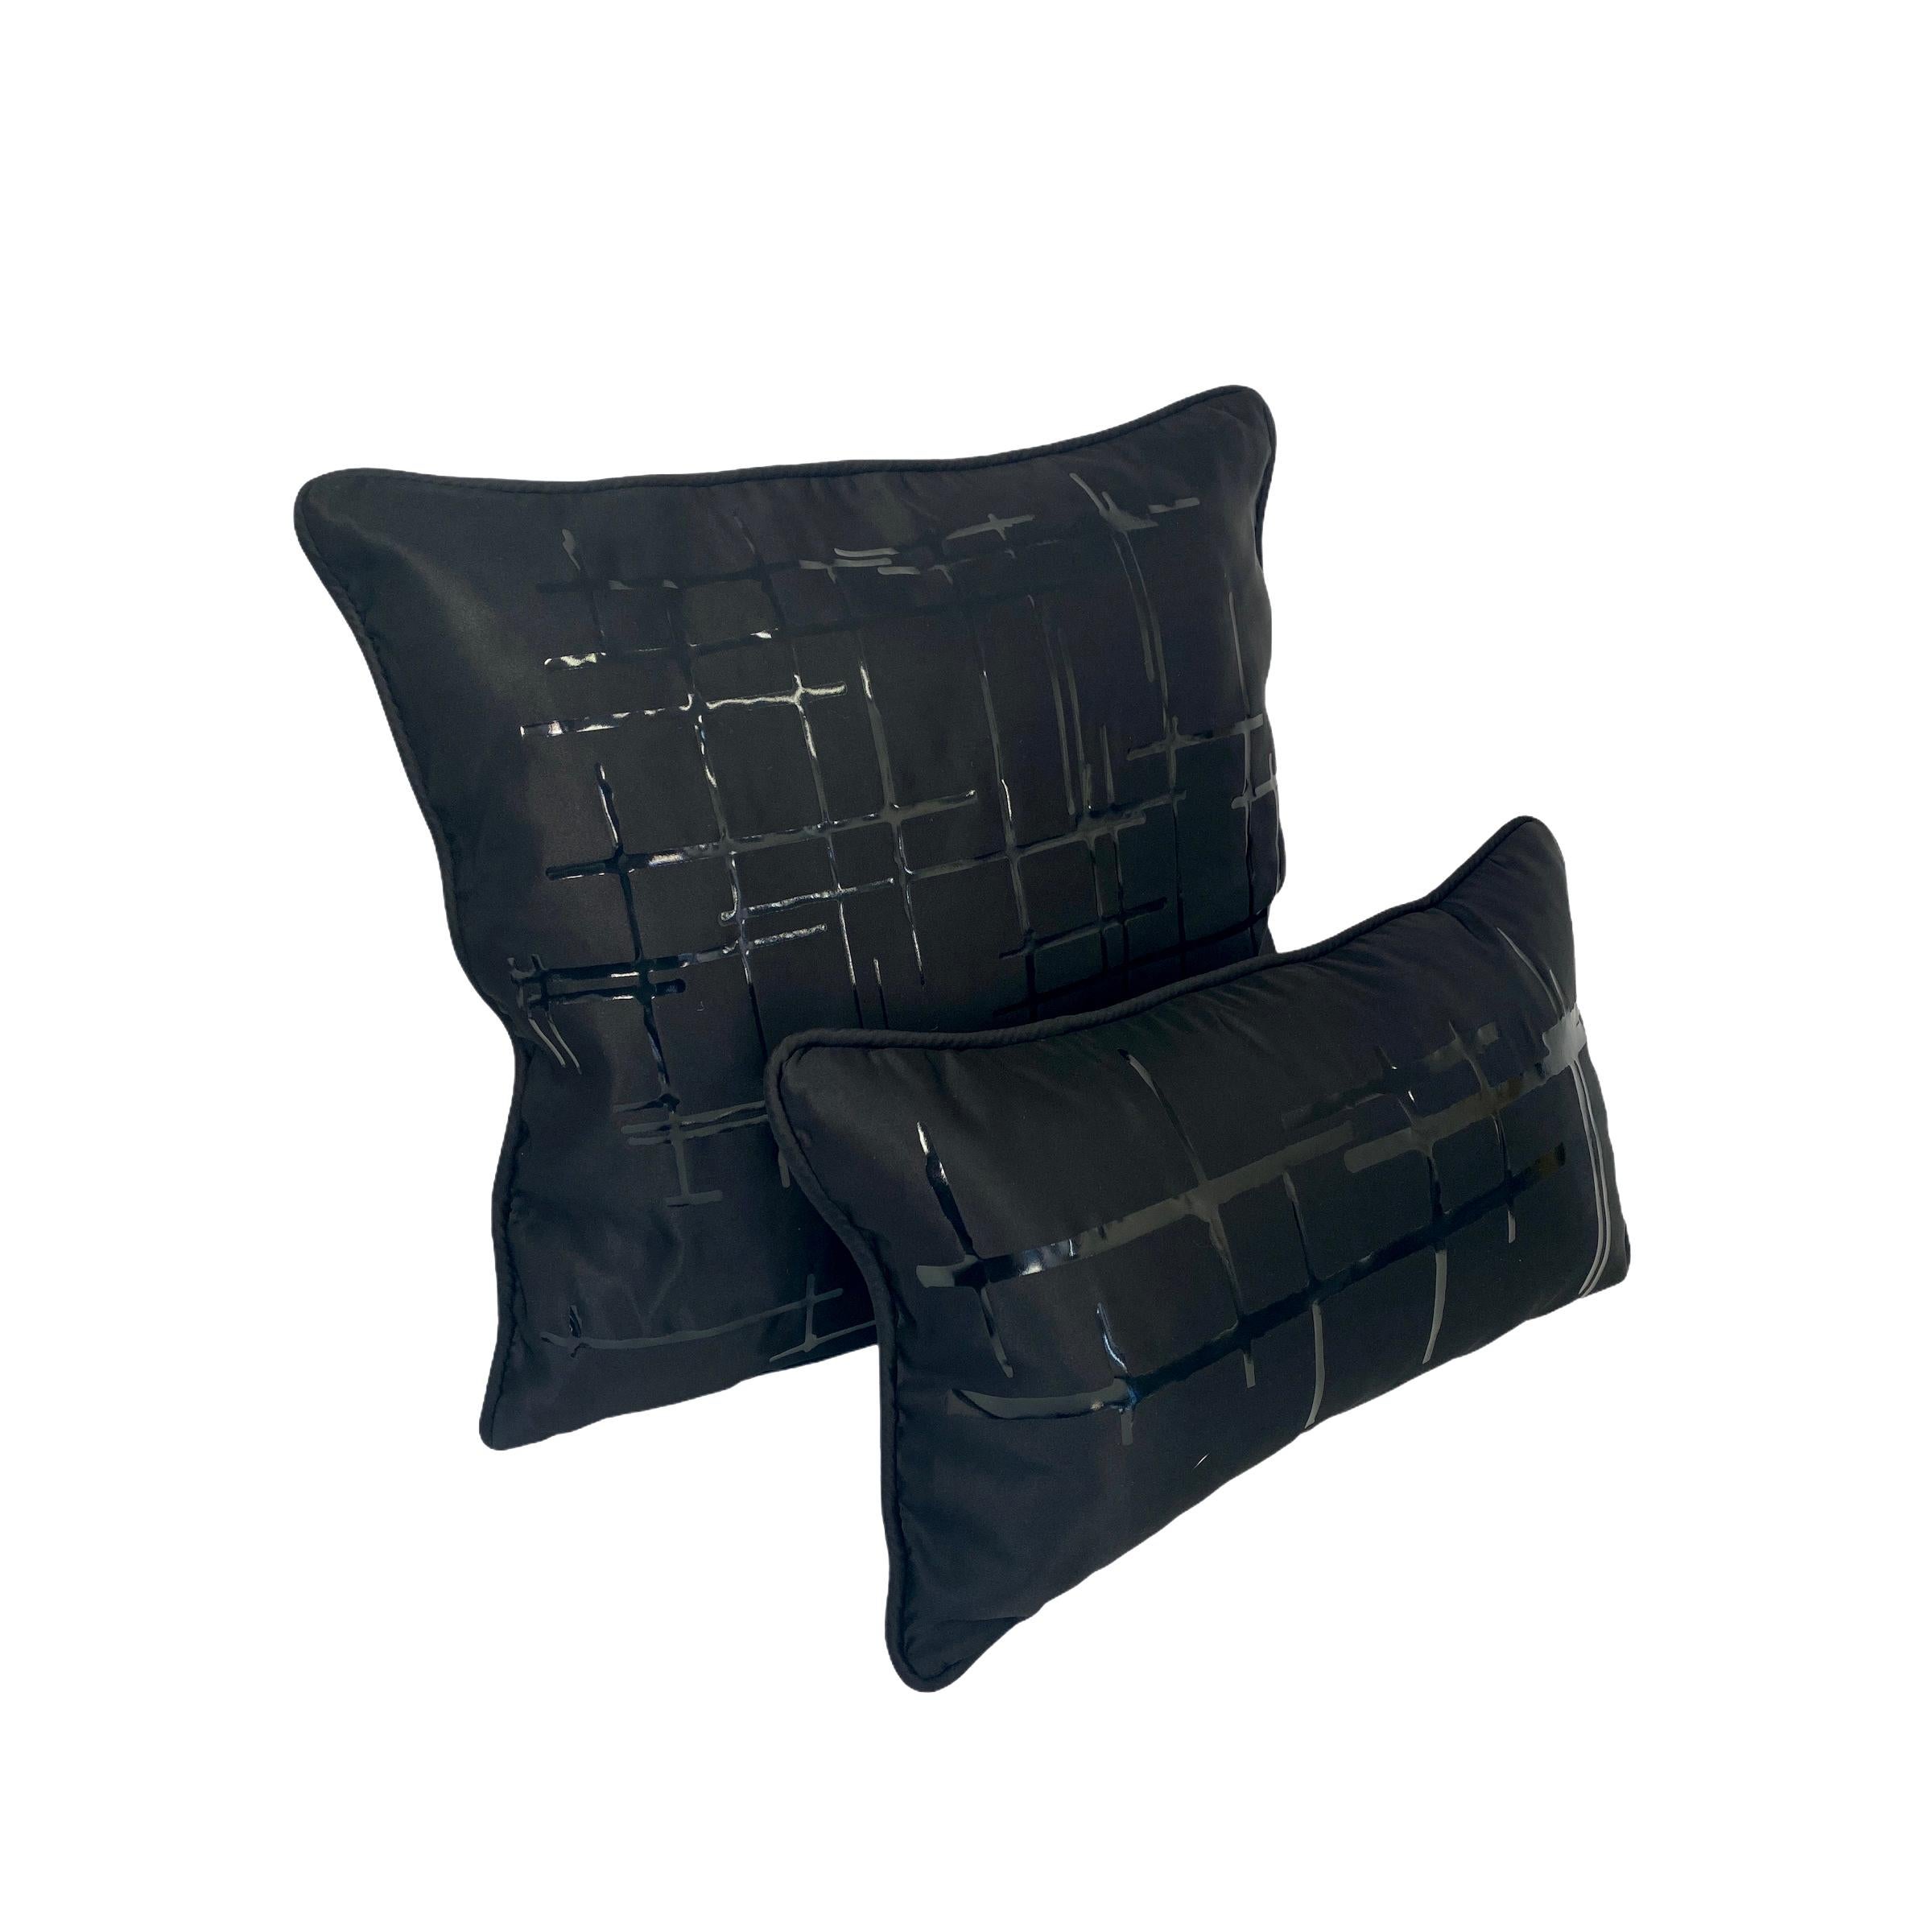 Authentic Italian silk duchesse satin pillows in midnight black. Black vinyl print inspired by modern architecture and executed in our in-house design studio in Manhattan. Large pillow: 20 x 20 in / 51 x 51 cm. Small pillow: 14 x 20 in / 35 x 51 cm.